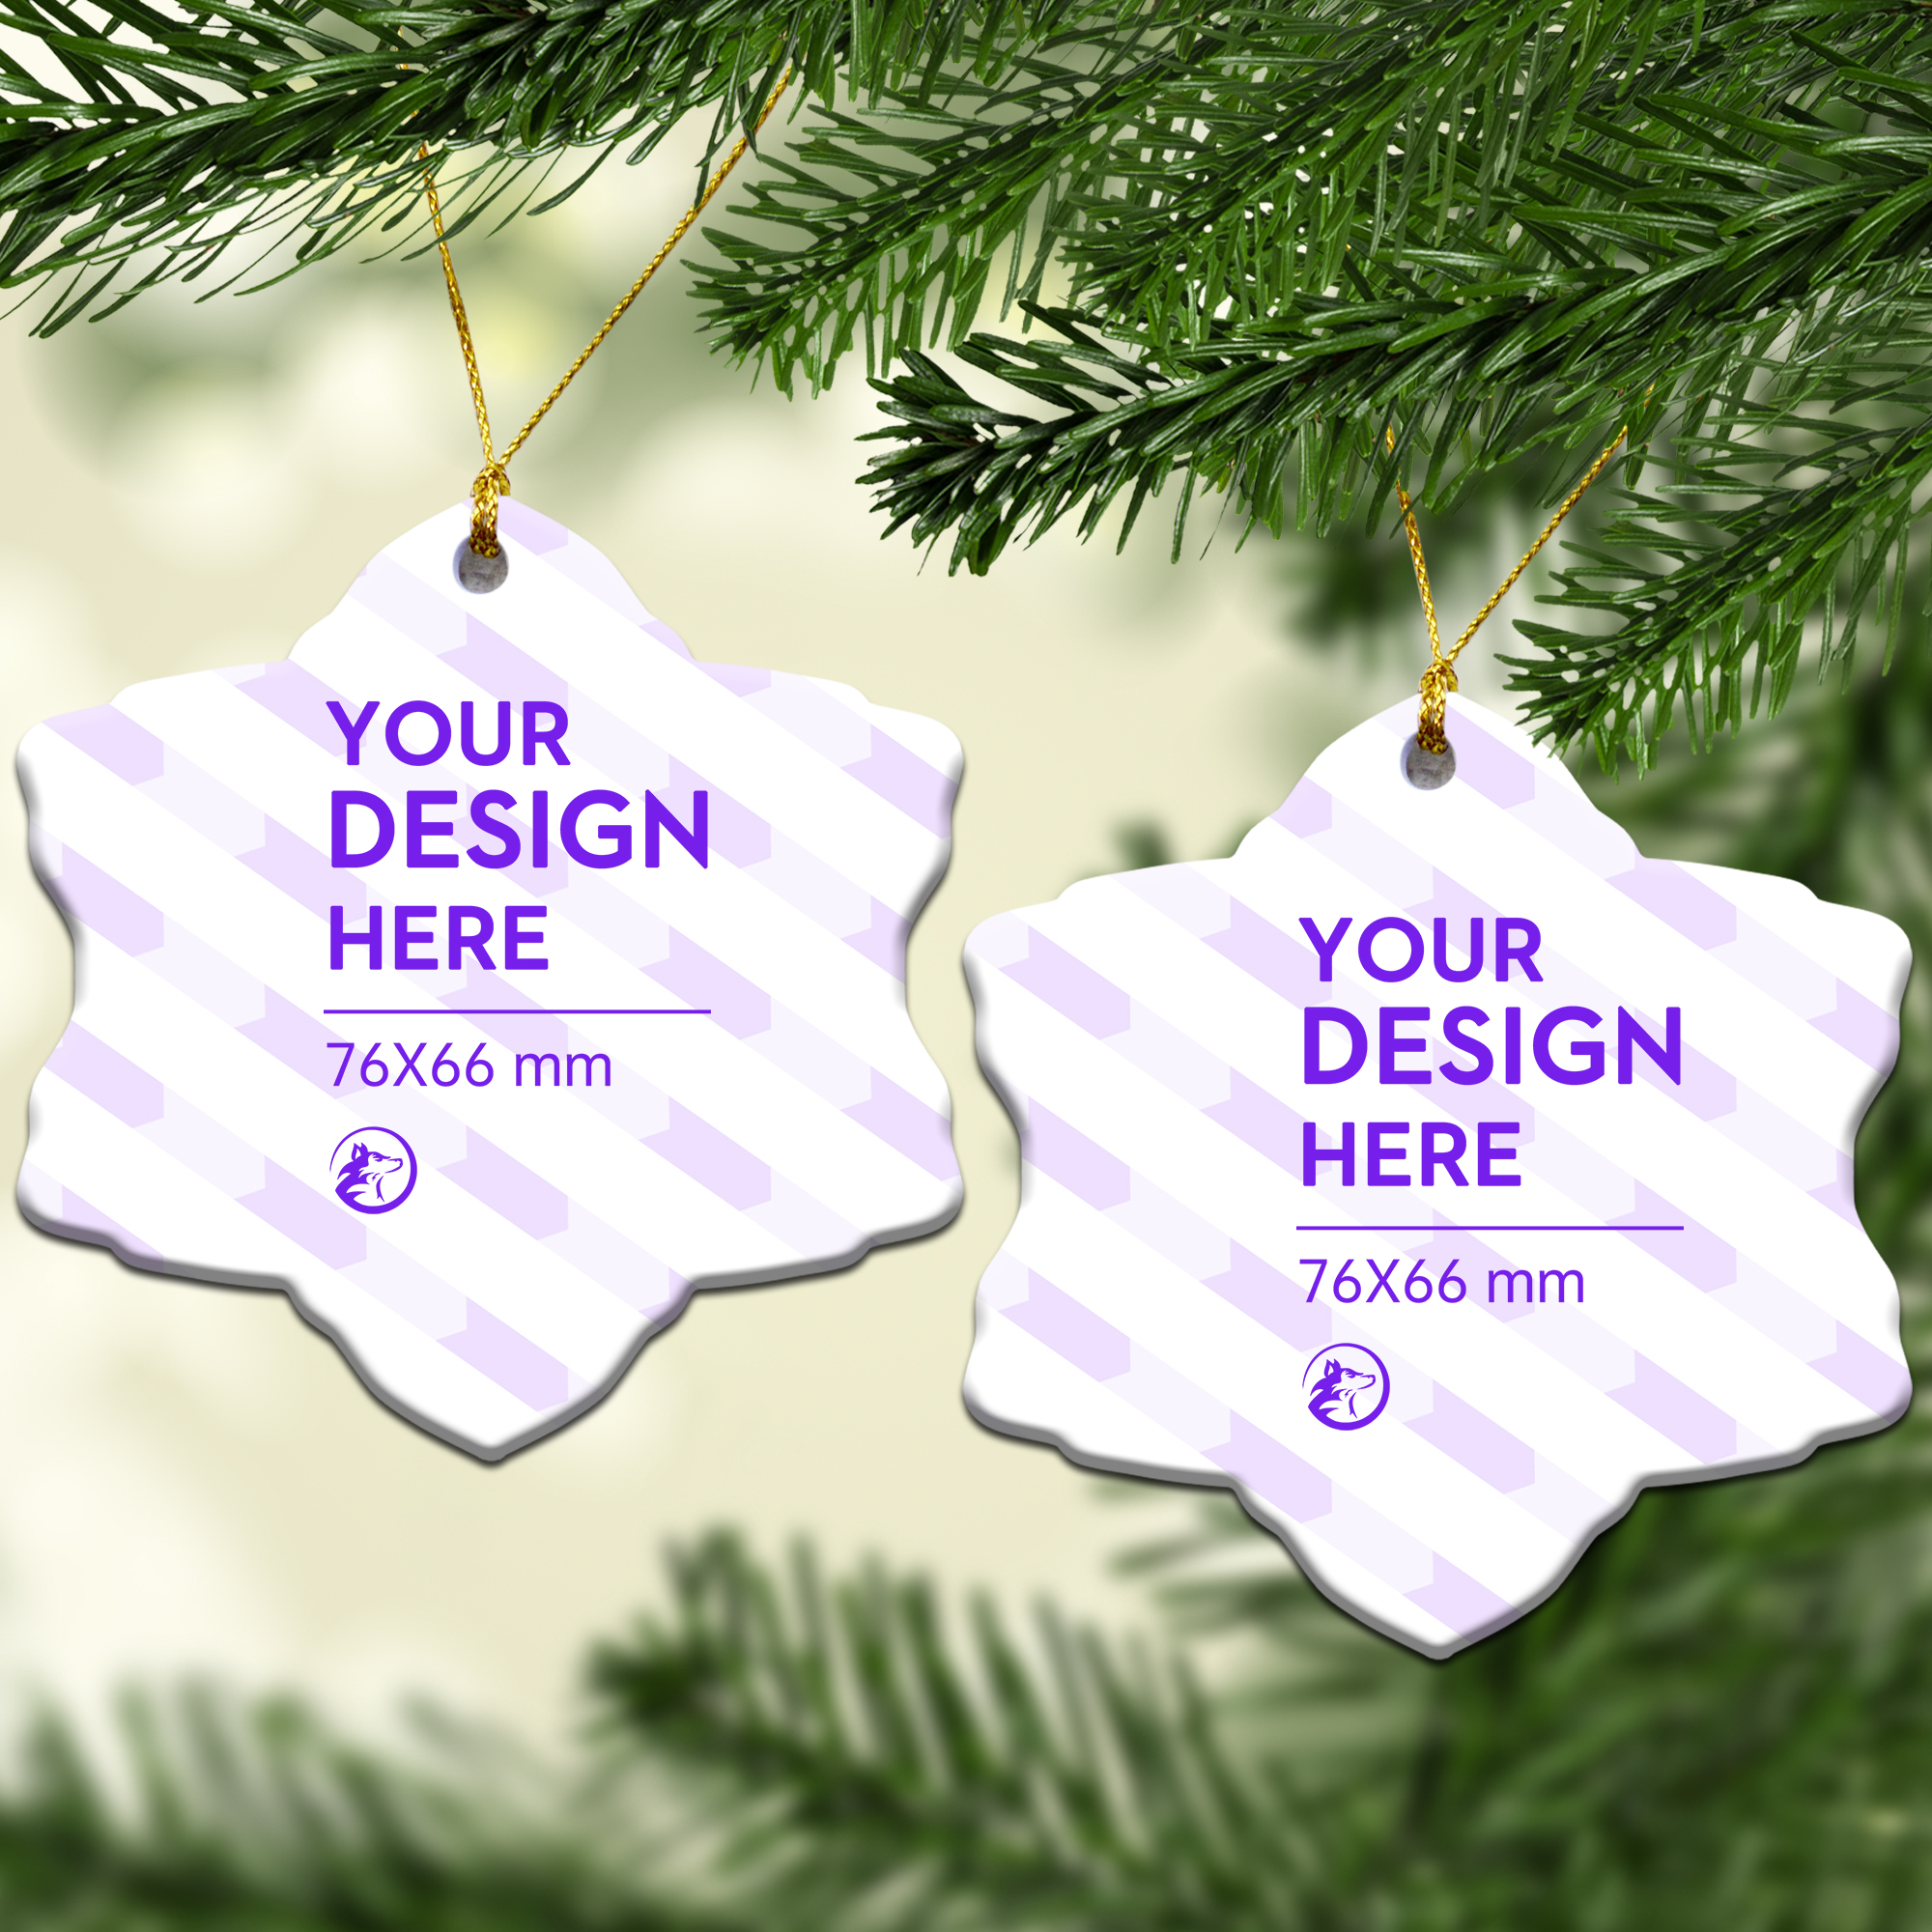 Snowflake Shape Ceramic Hanging Ornament with Double-side Prints